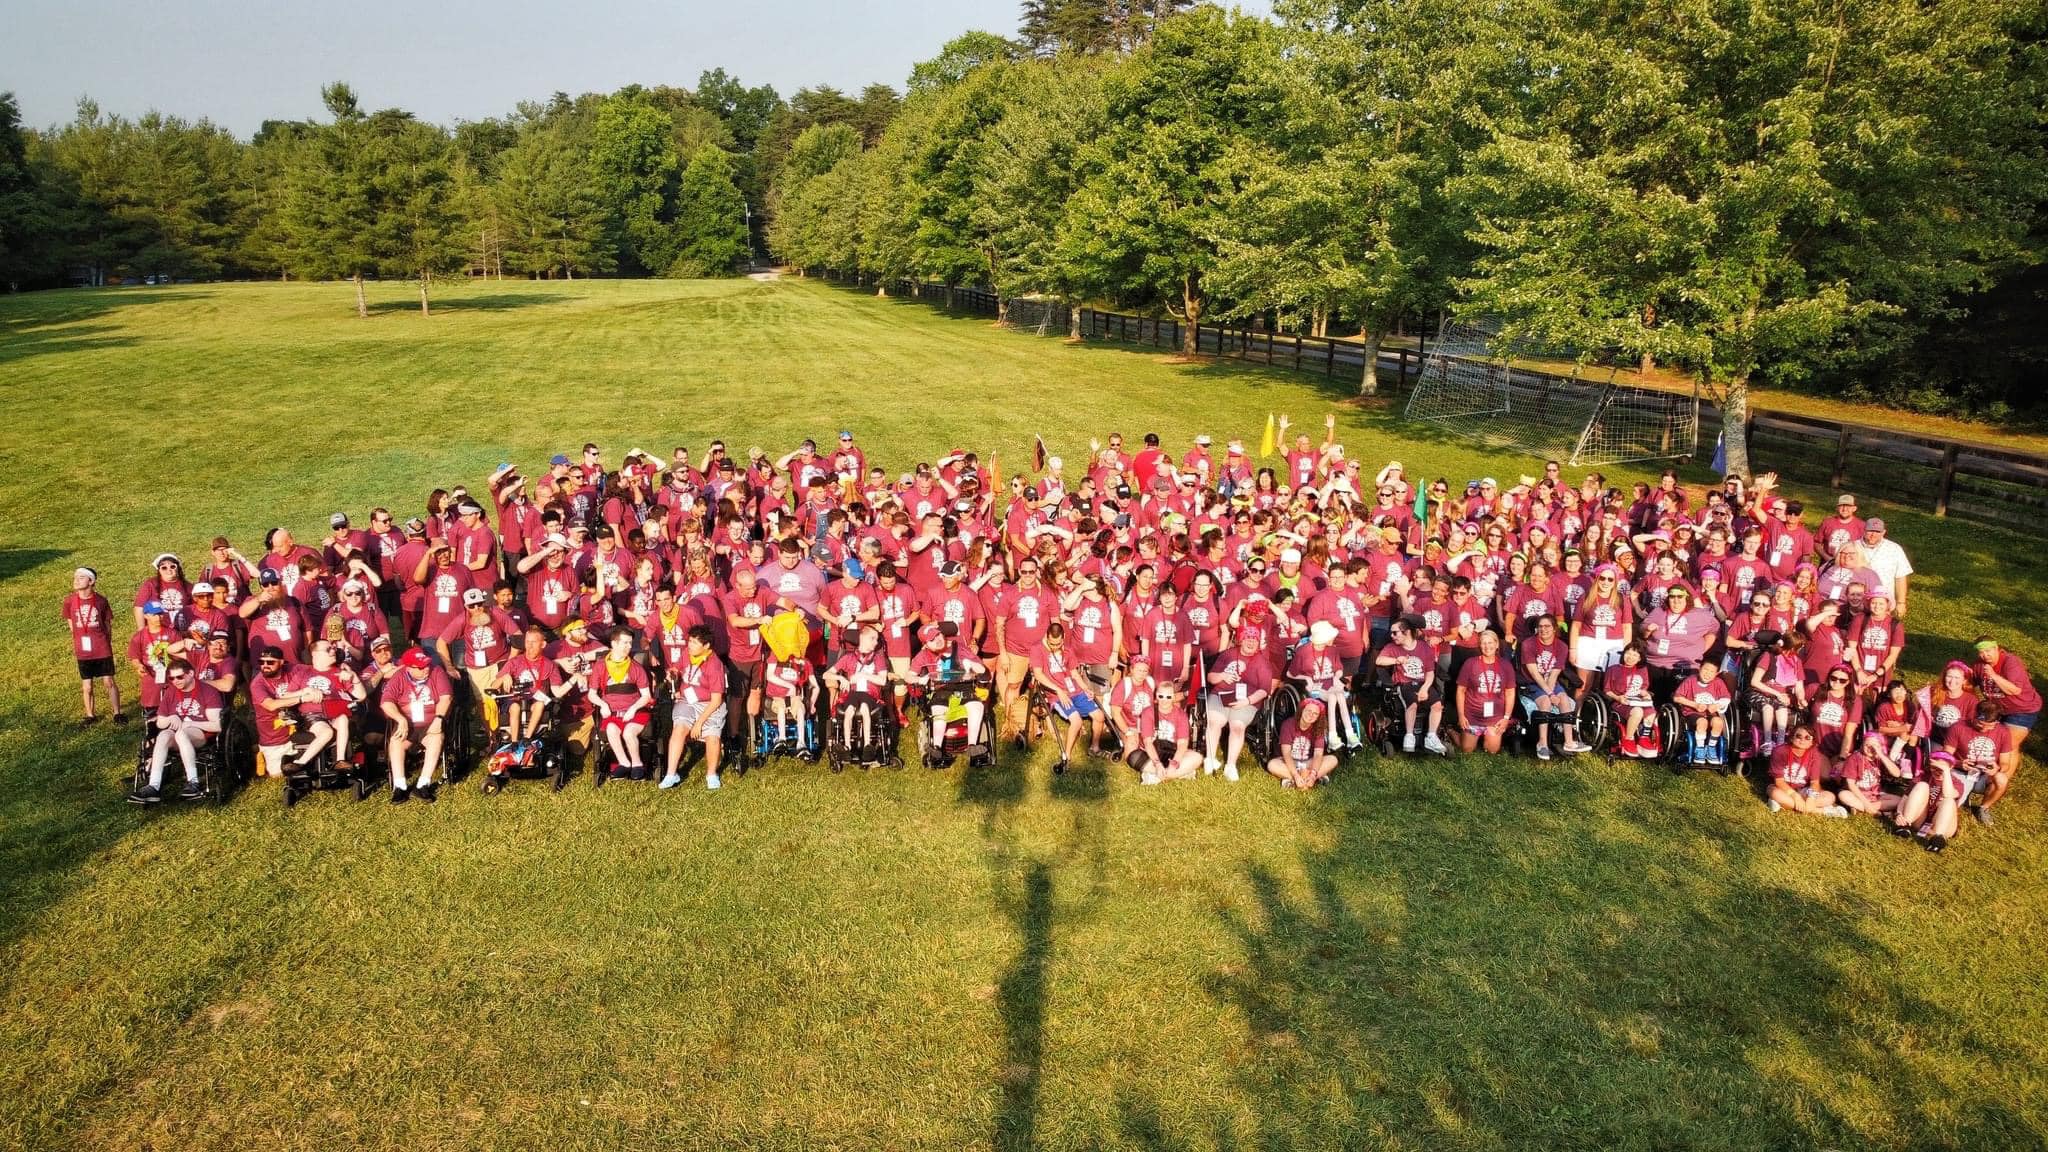 A group photo of campers and volunteers taken from a drone.